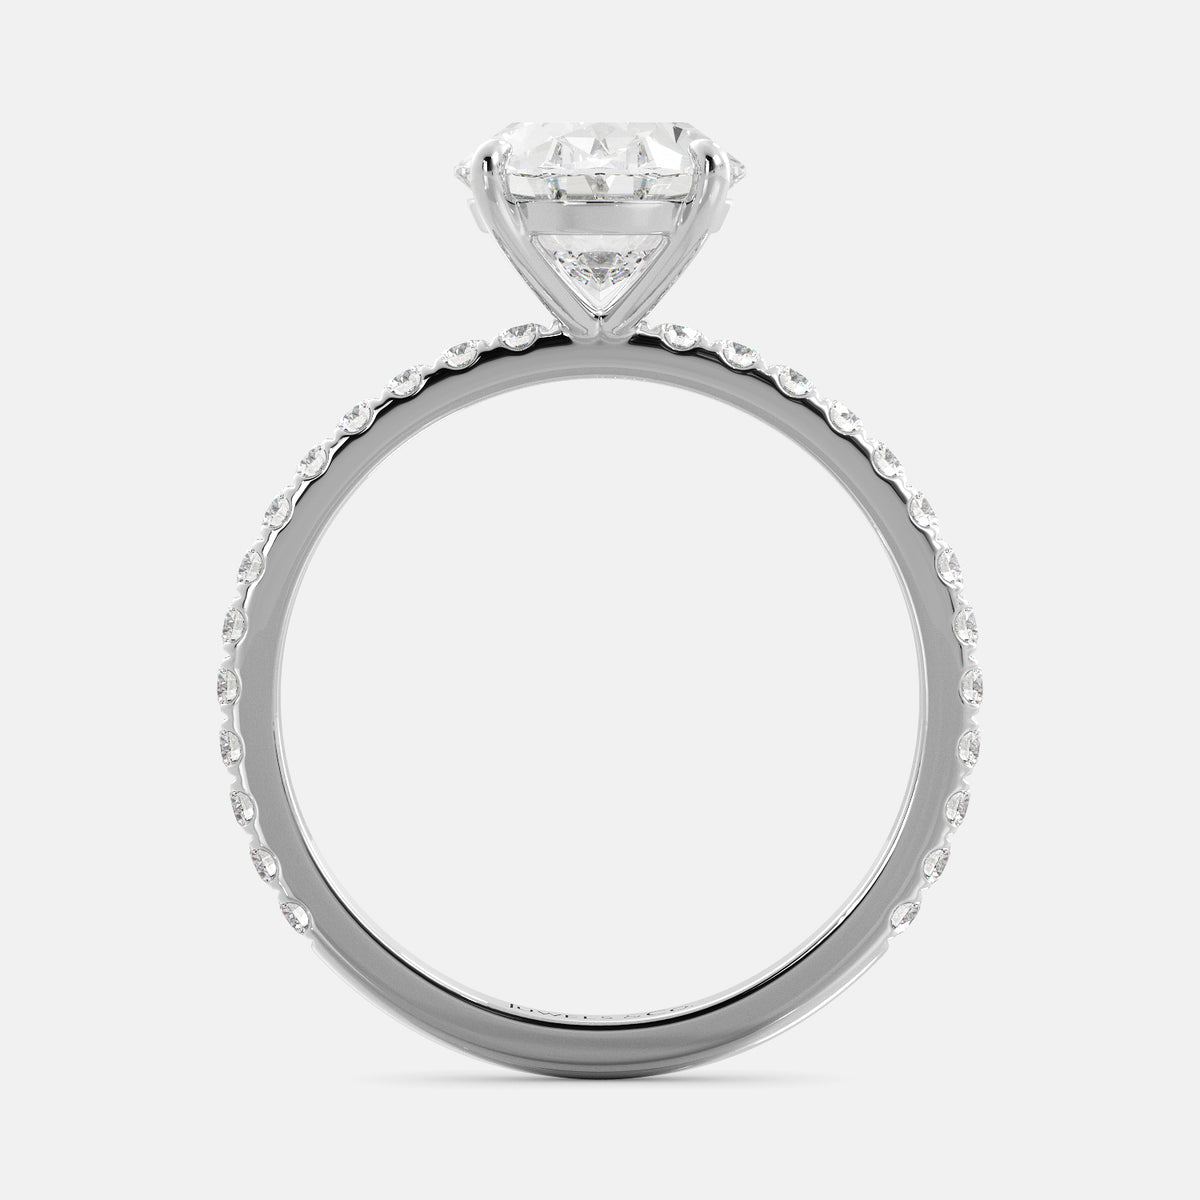 Oval Solitaire Diamond Ring with Pavé